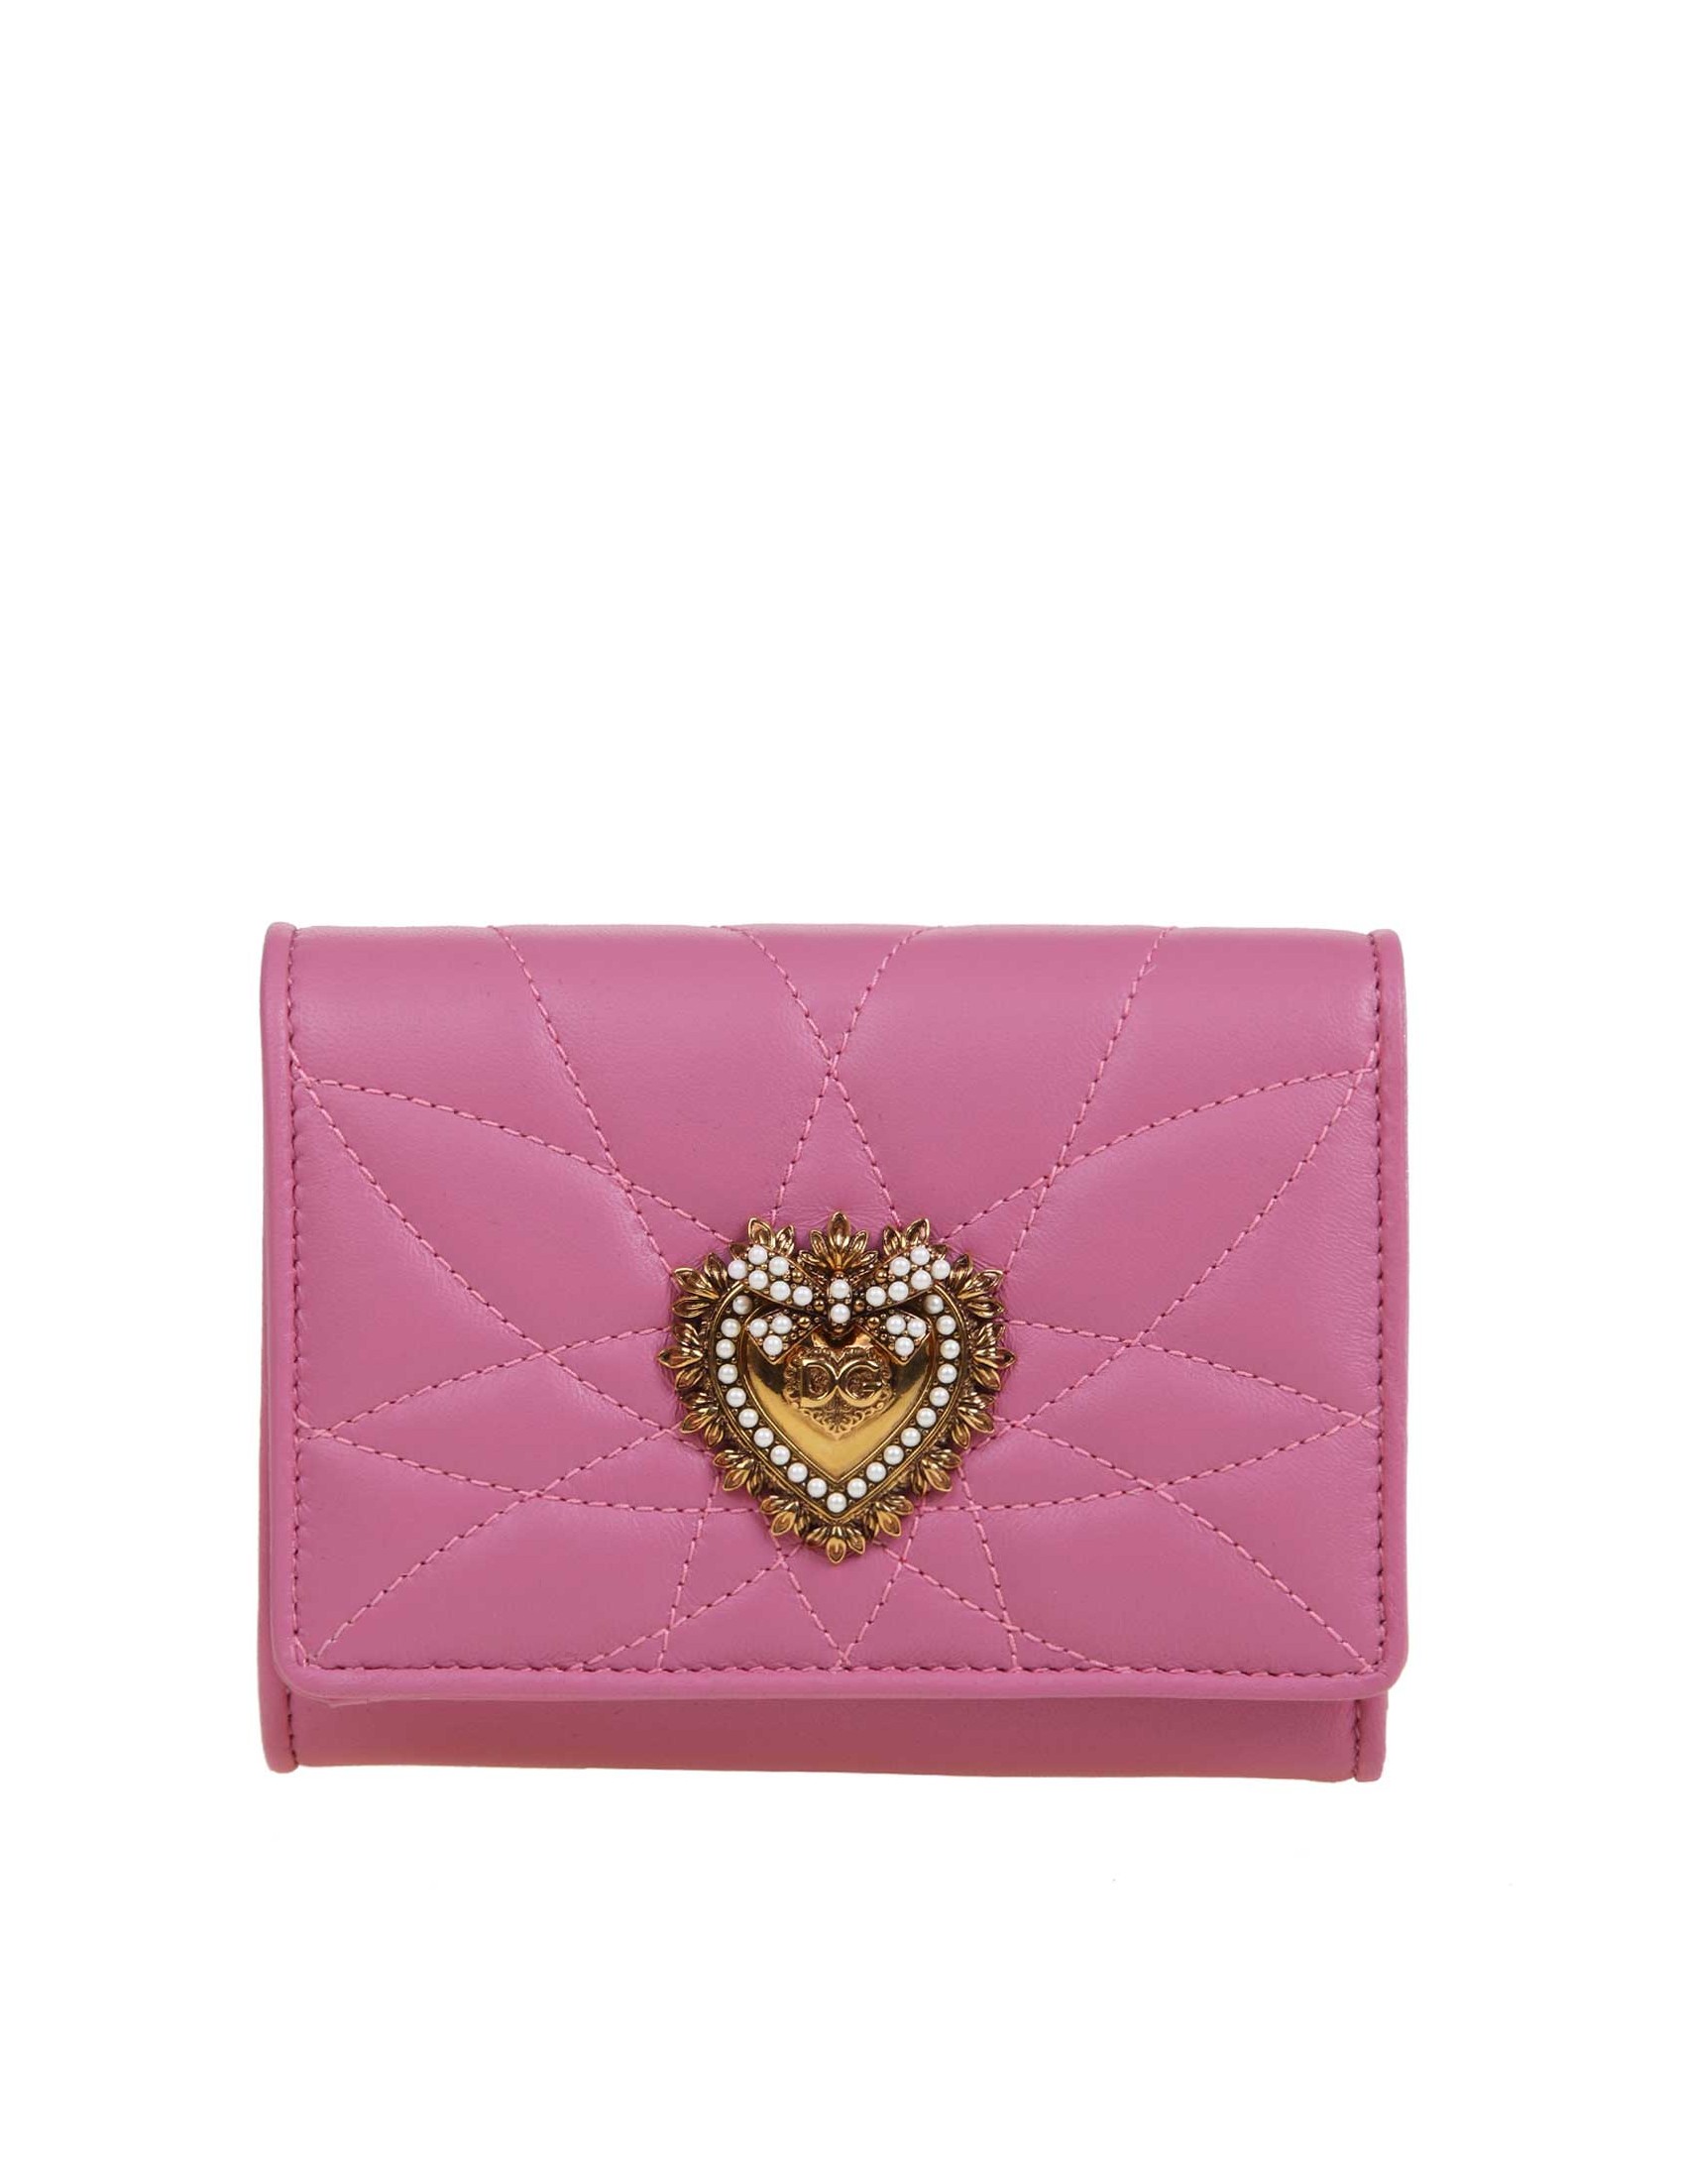 dolce and gabbana small wallet